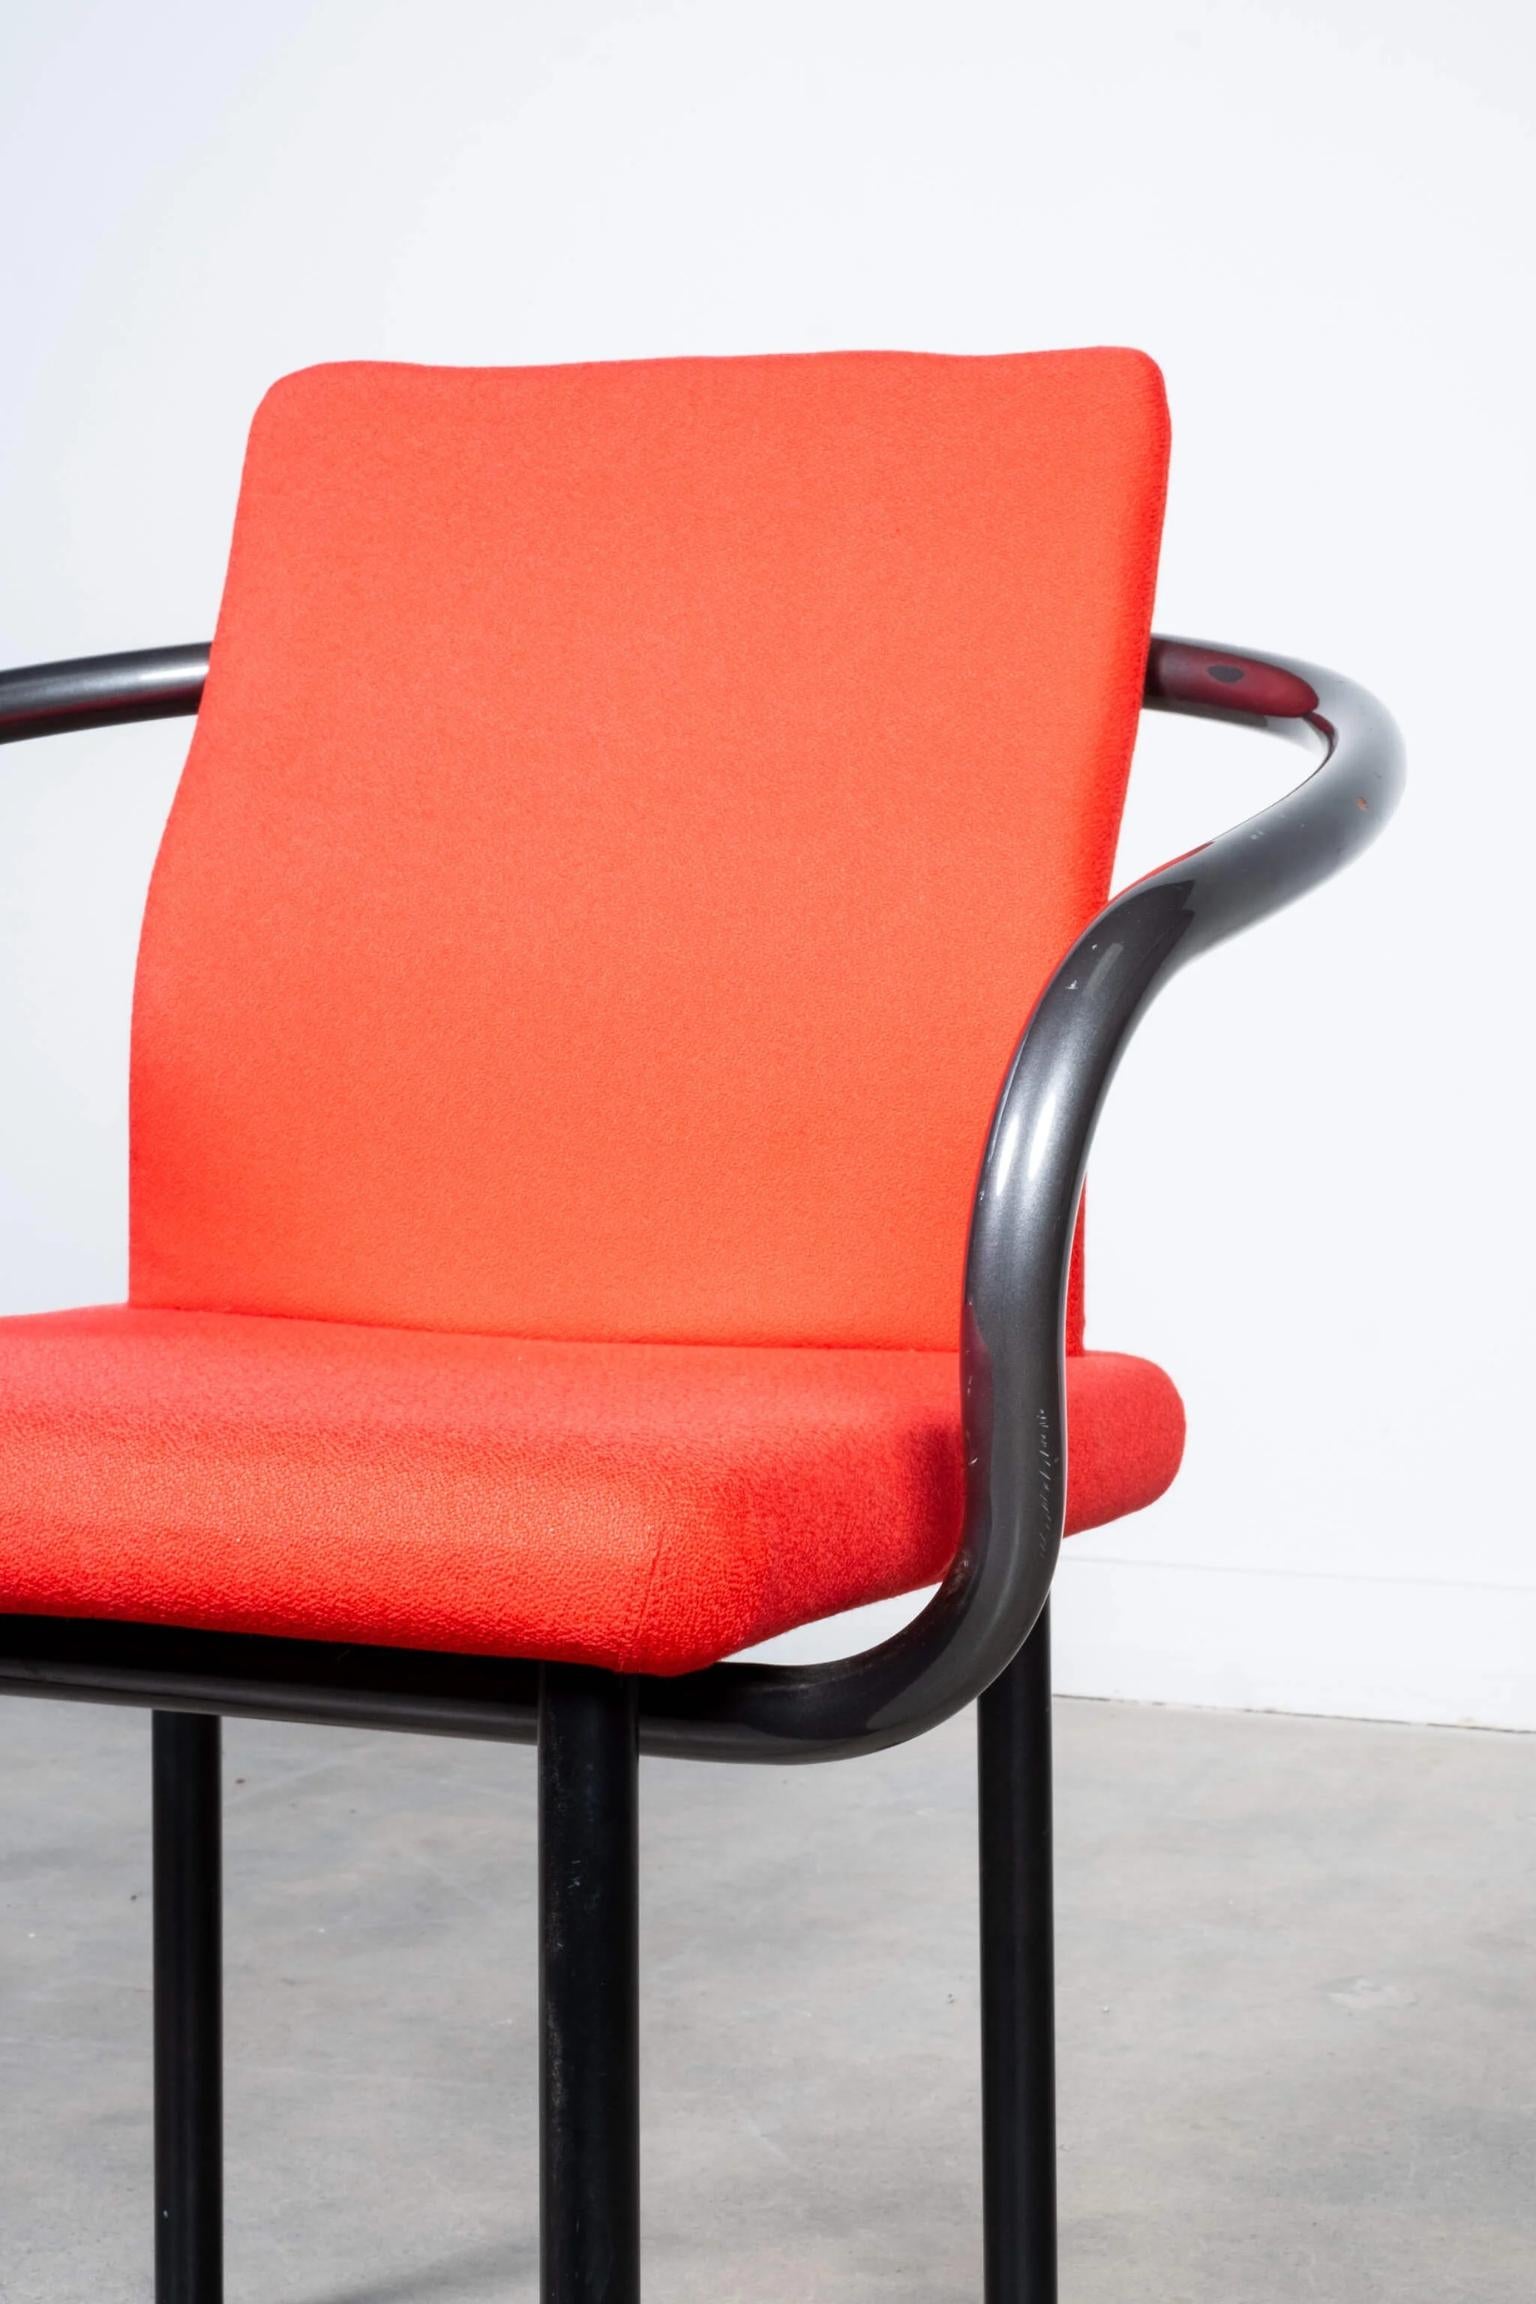 Ettore Sottsass for Knoll, Set of 6 Mandarin Chairs in Original Red Fabric For Sale 1